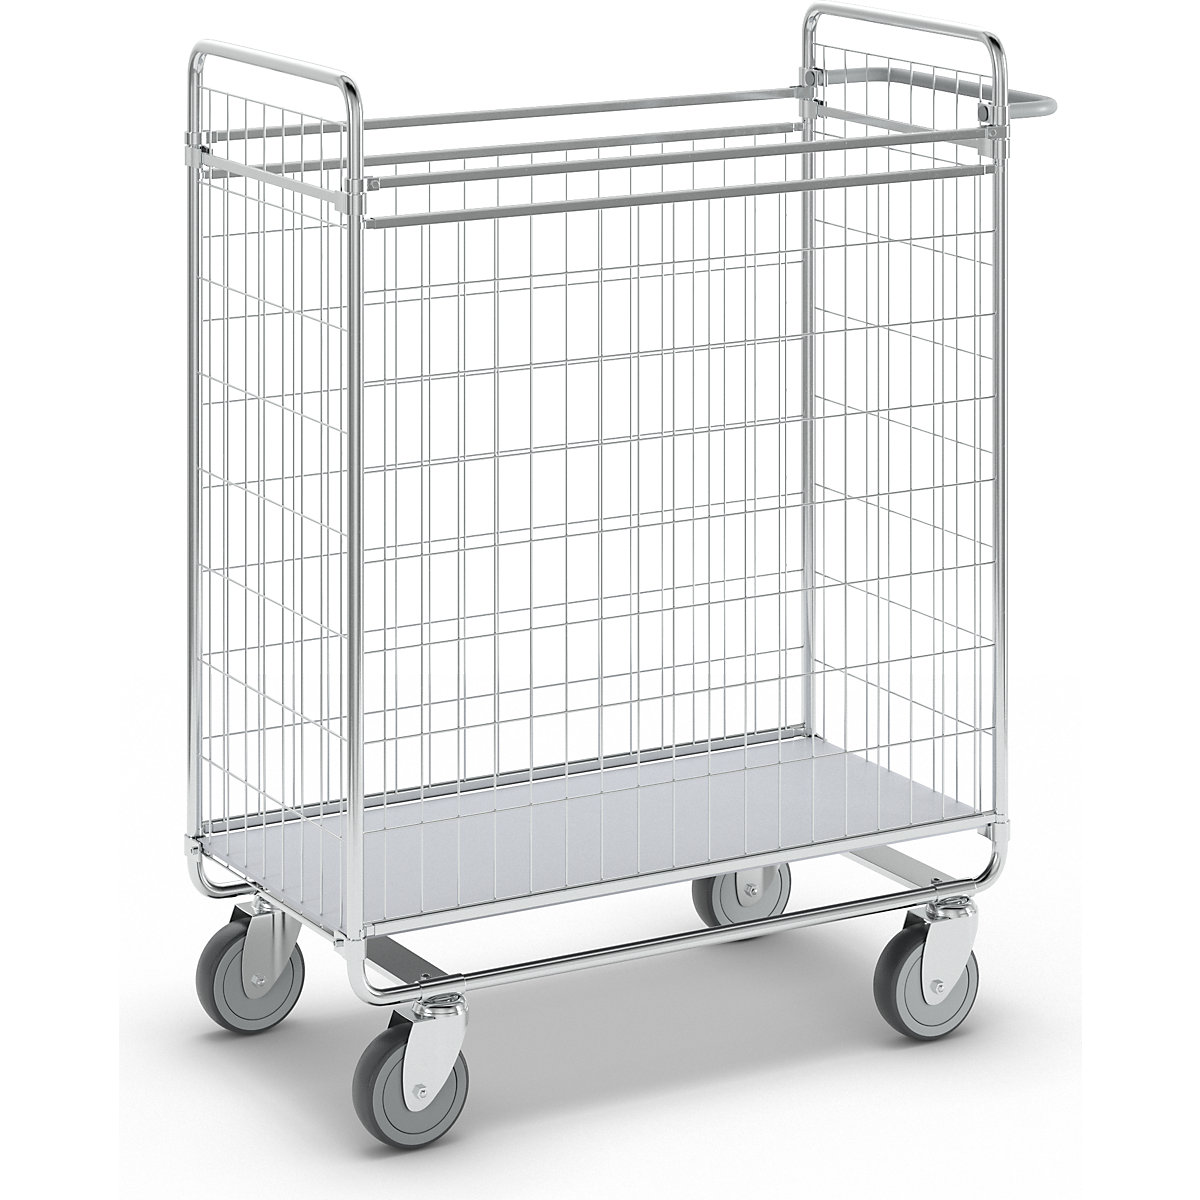 SERIES 100 four-sided trolley – HelgeNyberg, max. load 100 kg, LxWxH 930 x 460 x 1120 mm-3